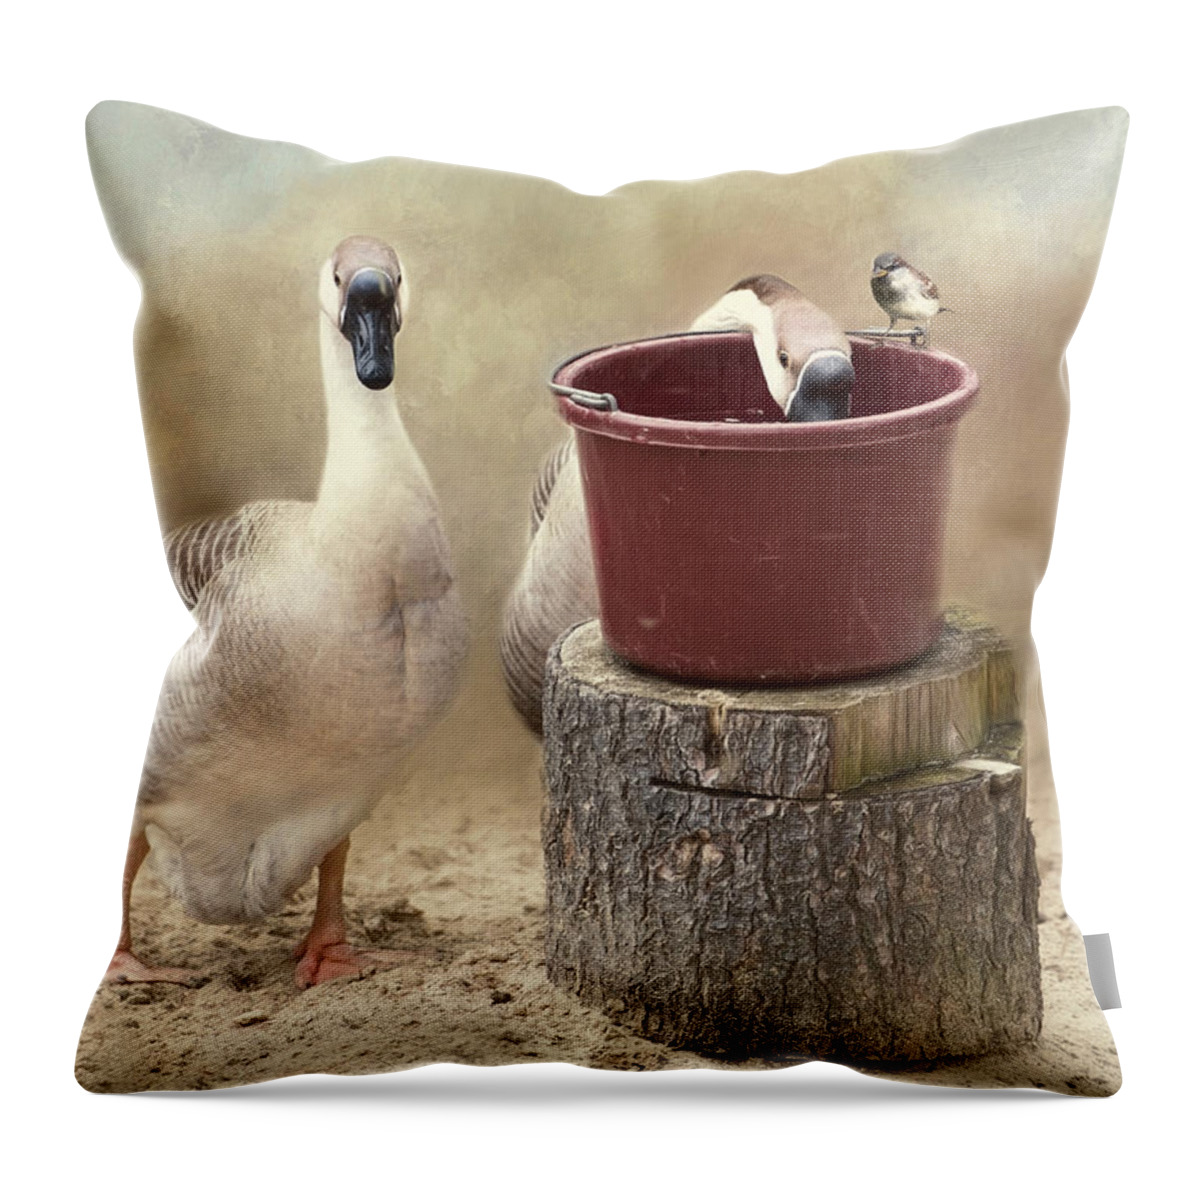 Geese Throw Pillow featuring the photograph The Red Bucket by Robin-Lee Vieira